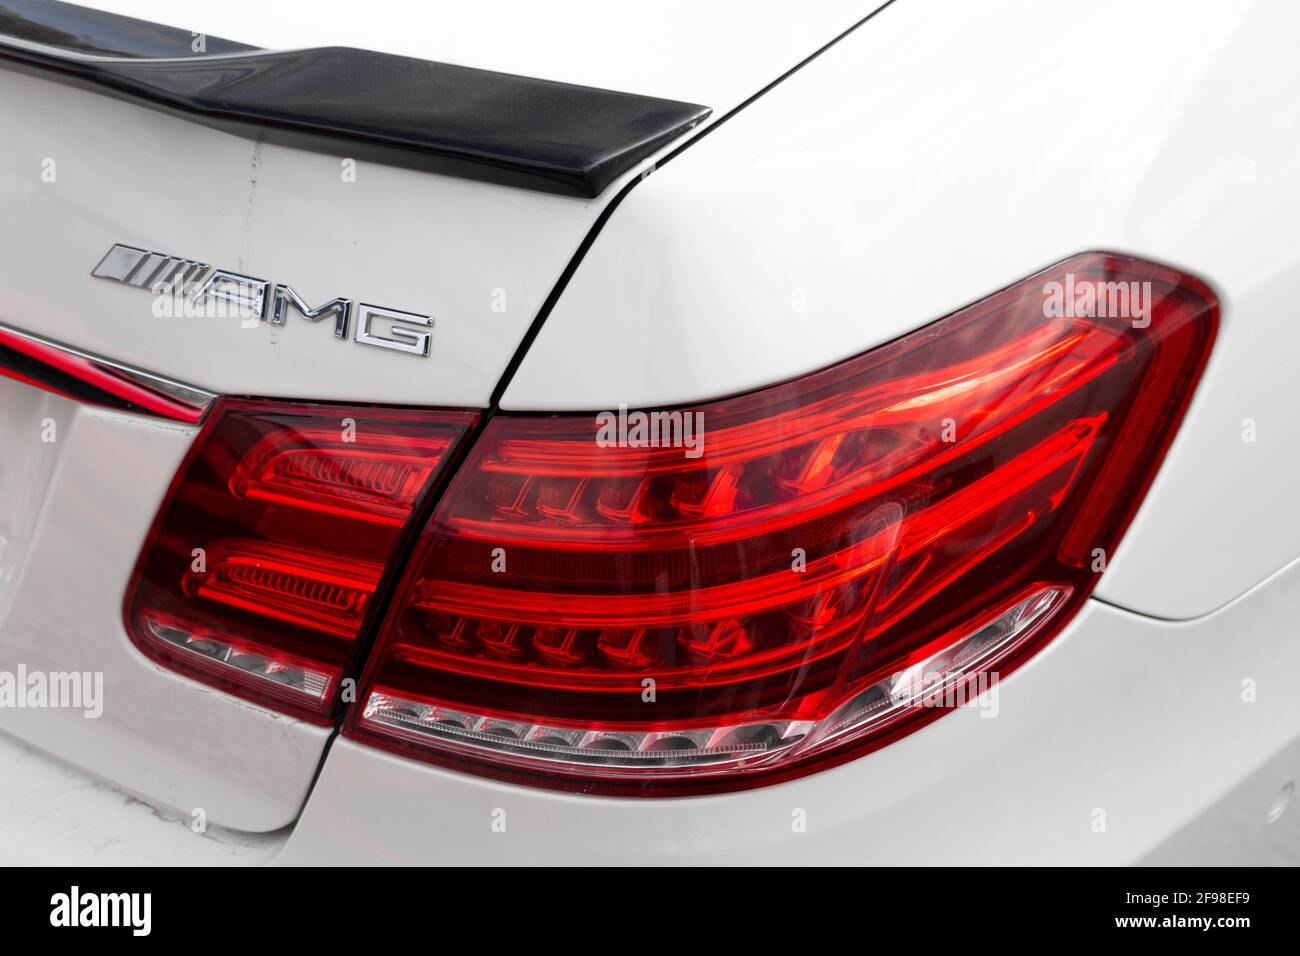 The Rear Quarter Light And AMG Badge With Carbon Fibre Brabus Rear Spoiler Of A 2013 Mercedes Benz E63S AMG W212 Stock Photo